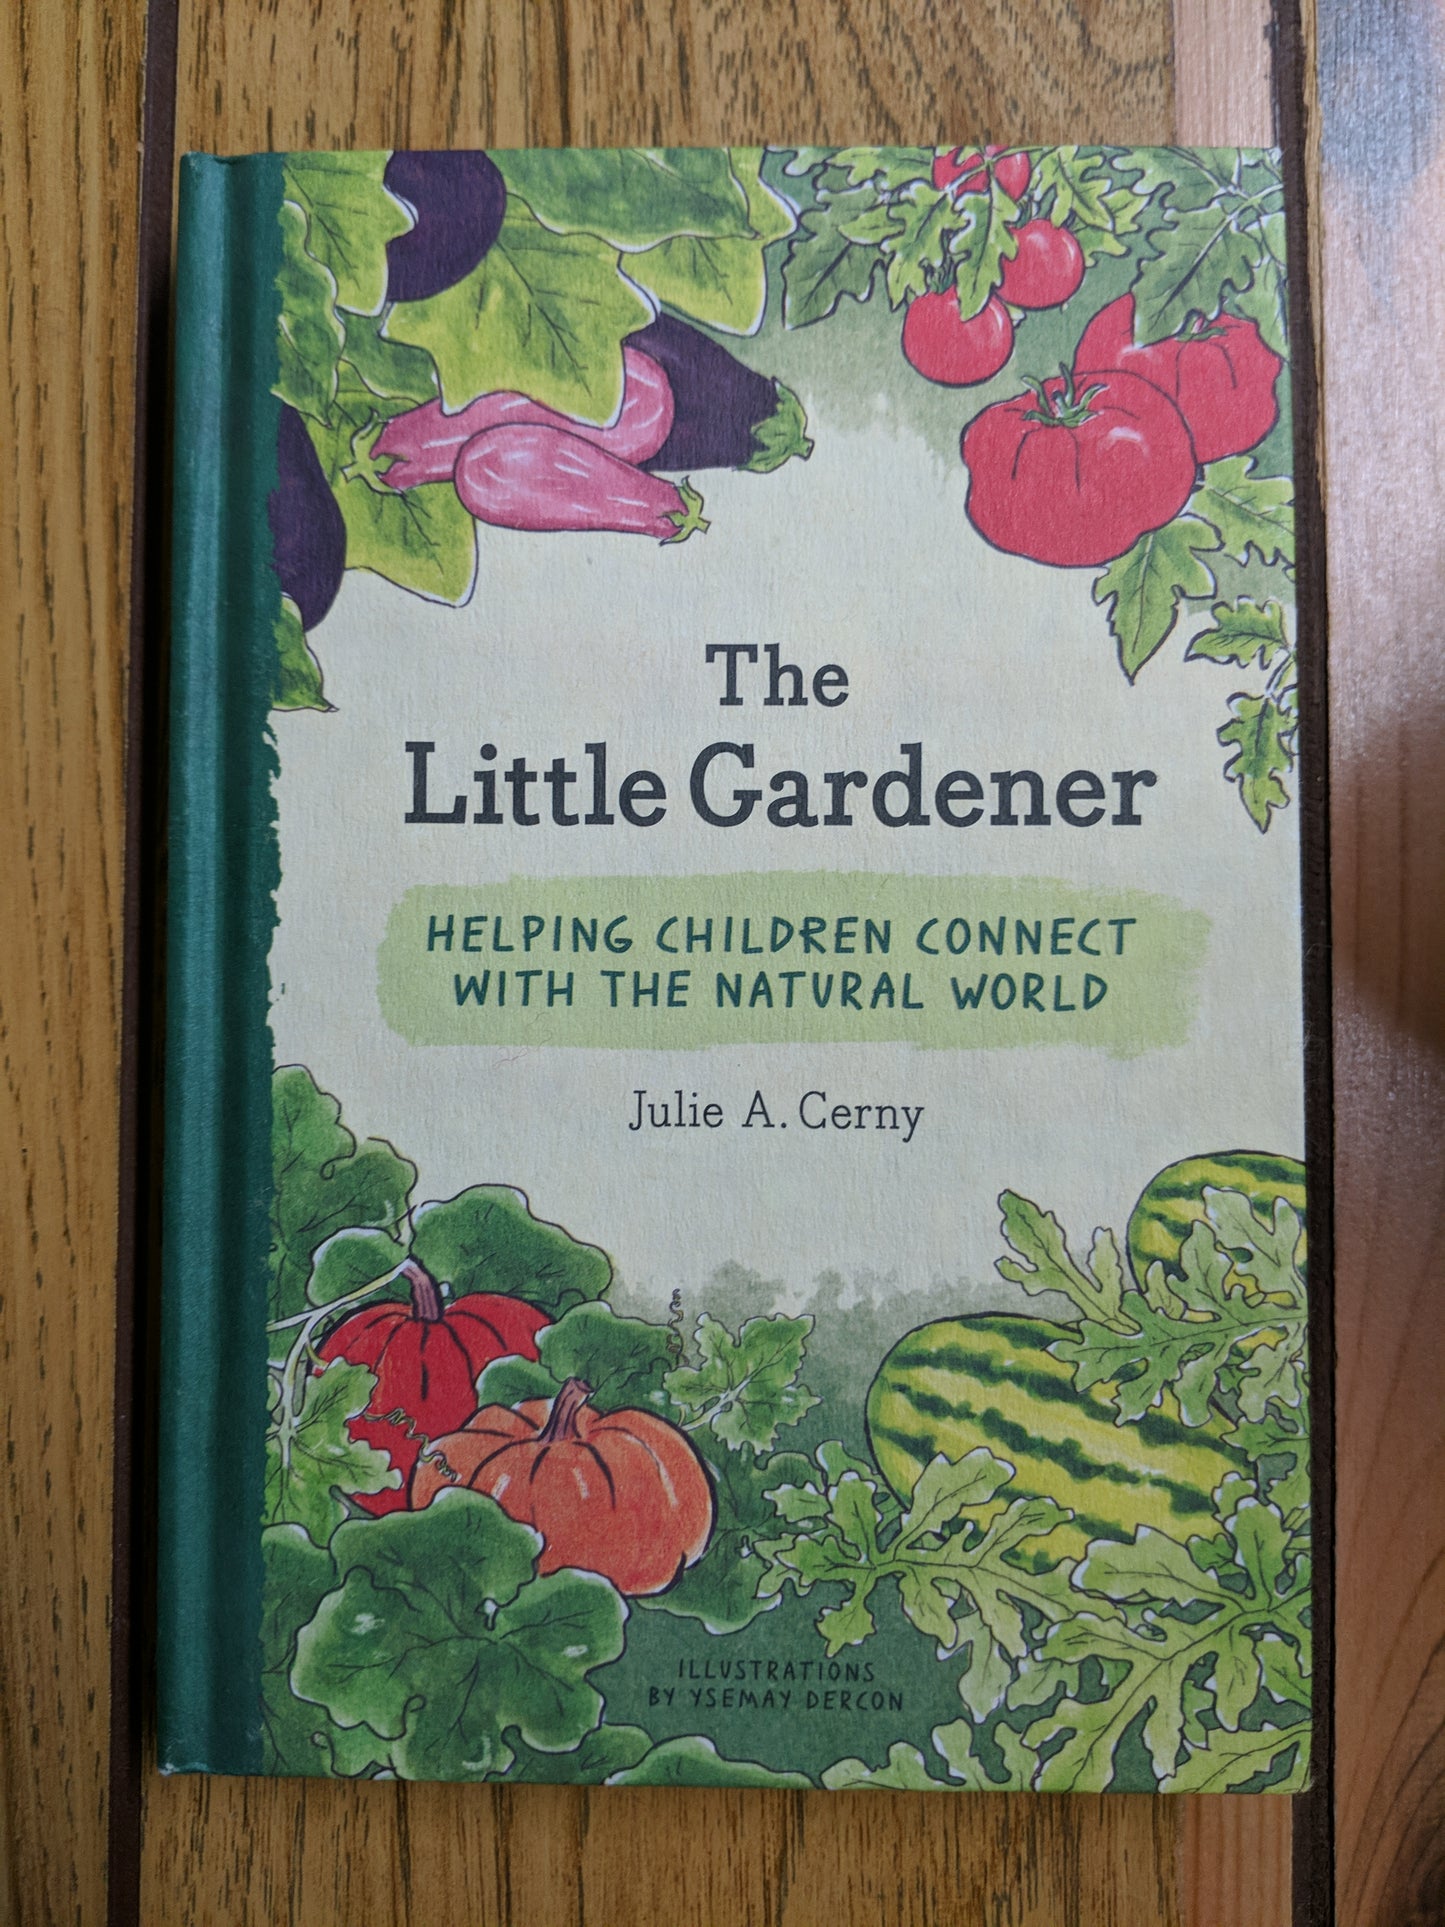 The Little Gardener: Helping Children Connect With The Natural World